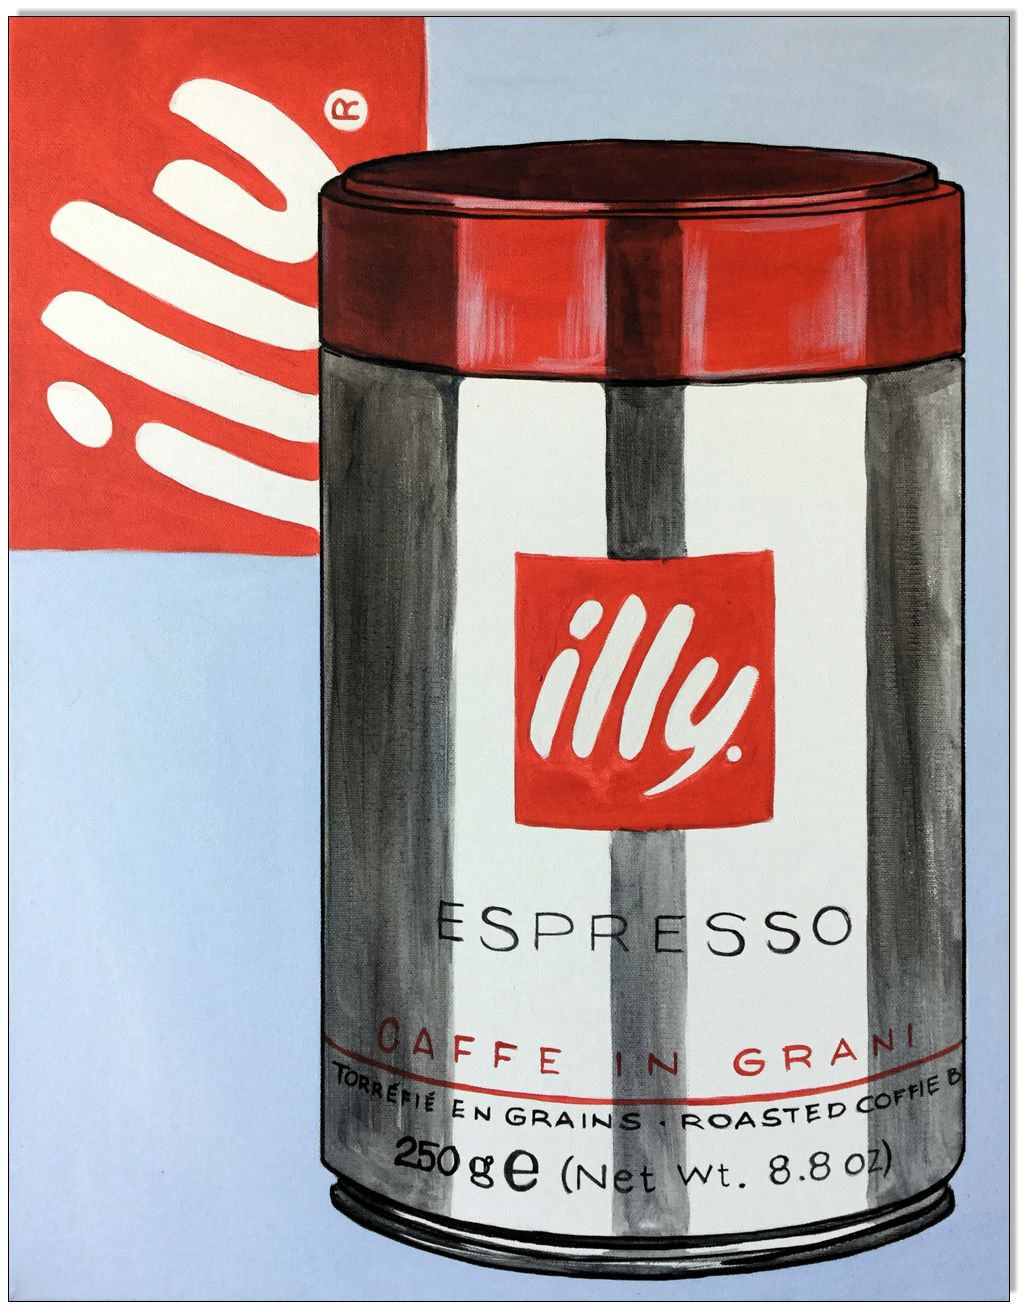 ILLY Coffee Can Art I - 40 x 50 cm